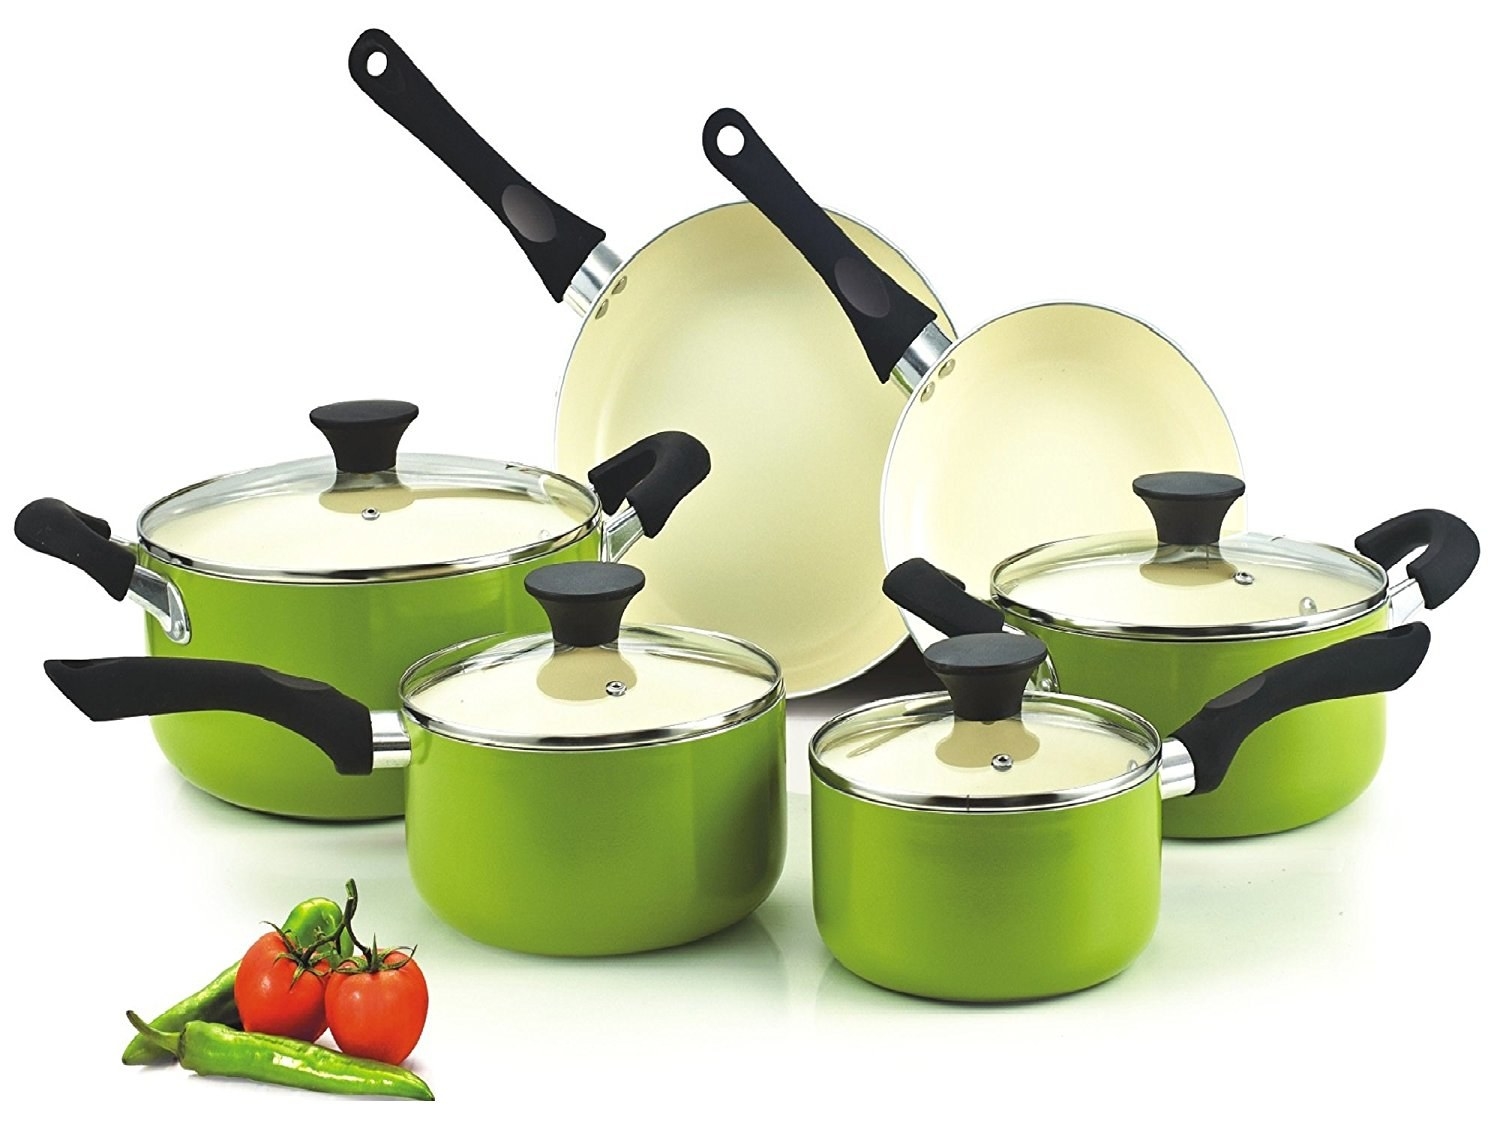 The Best Ceramic Cookware Sets for Home Chefs